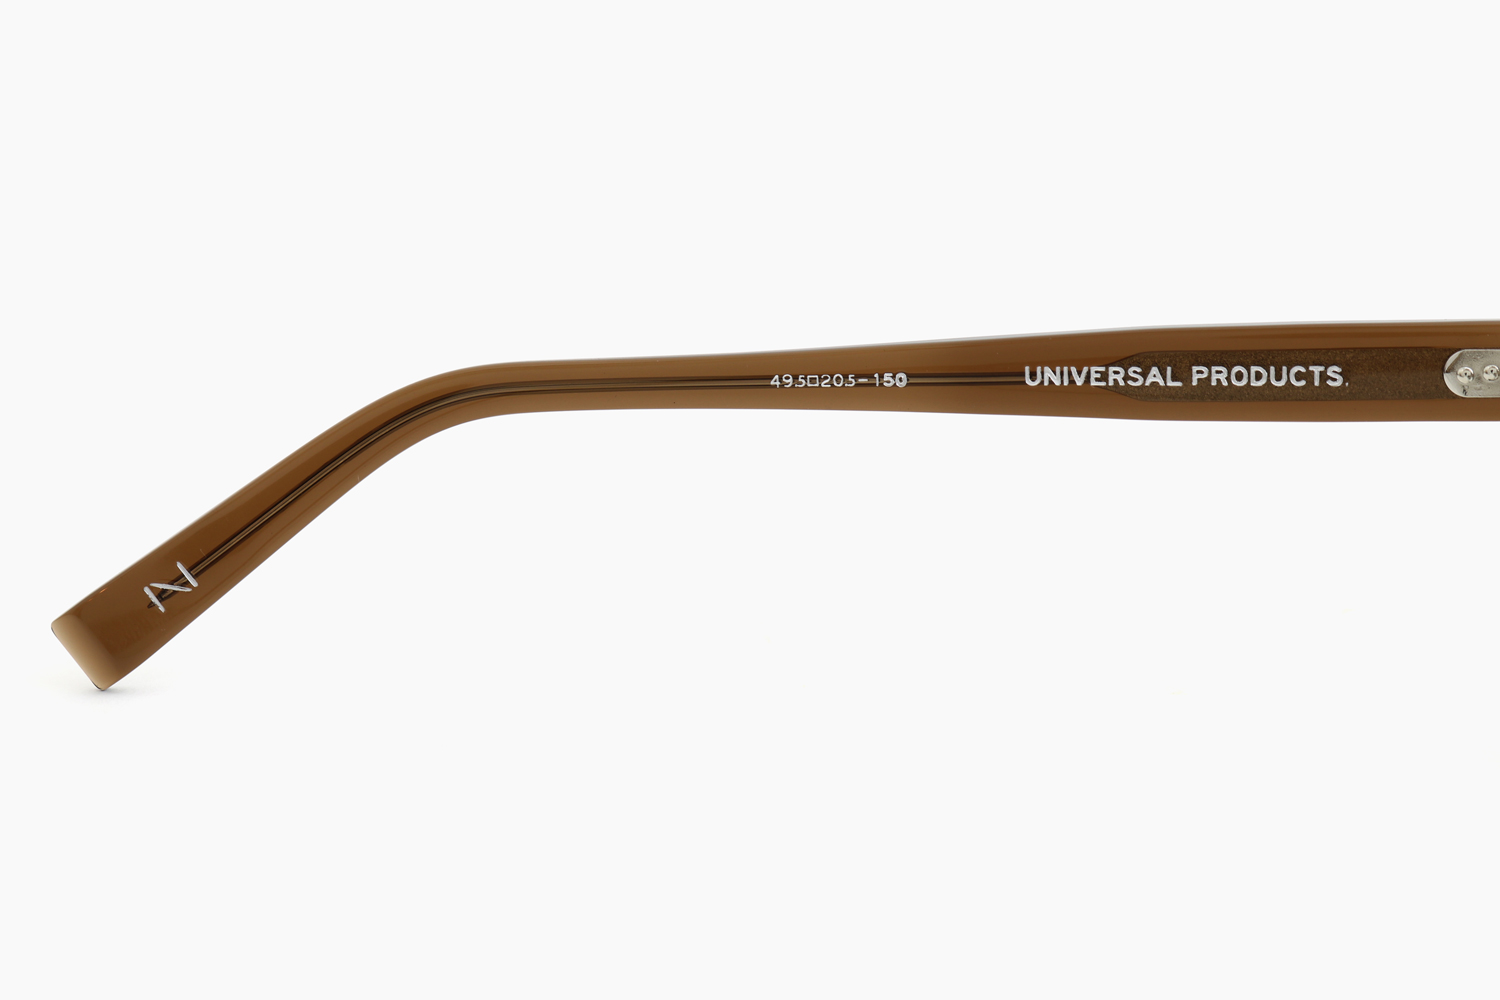 UNIVERSAL PRODUCTS. + Noritake x The PARKSIDE ROOM｜tpr-006 - BROWN SG｜The PARKSIDE ROOM